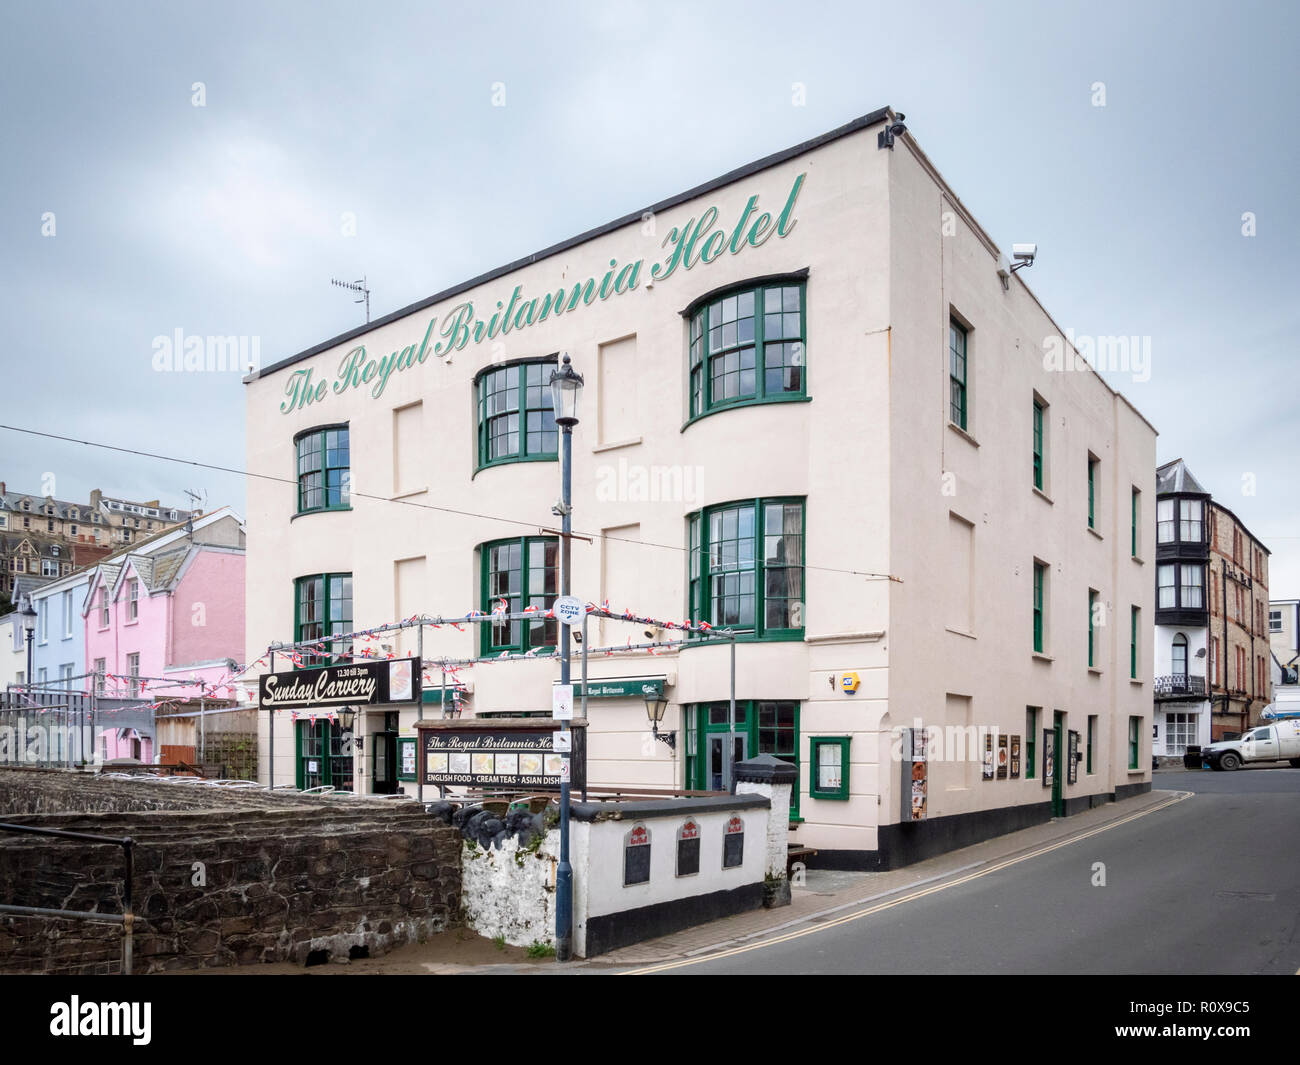 The Royal Britannia Hotel near the harbour at Ilfracombe Devon UK on a grey autumn out of season day Stock Photo